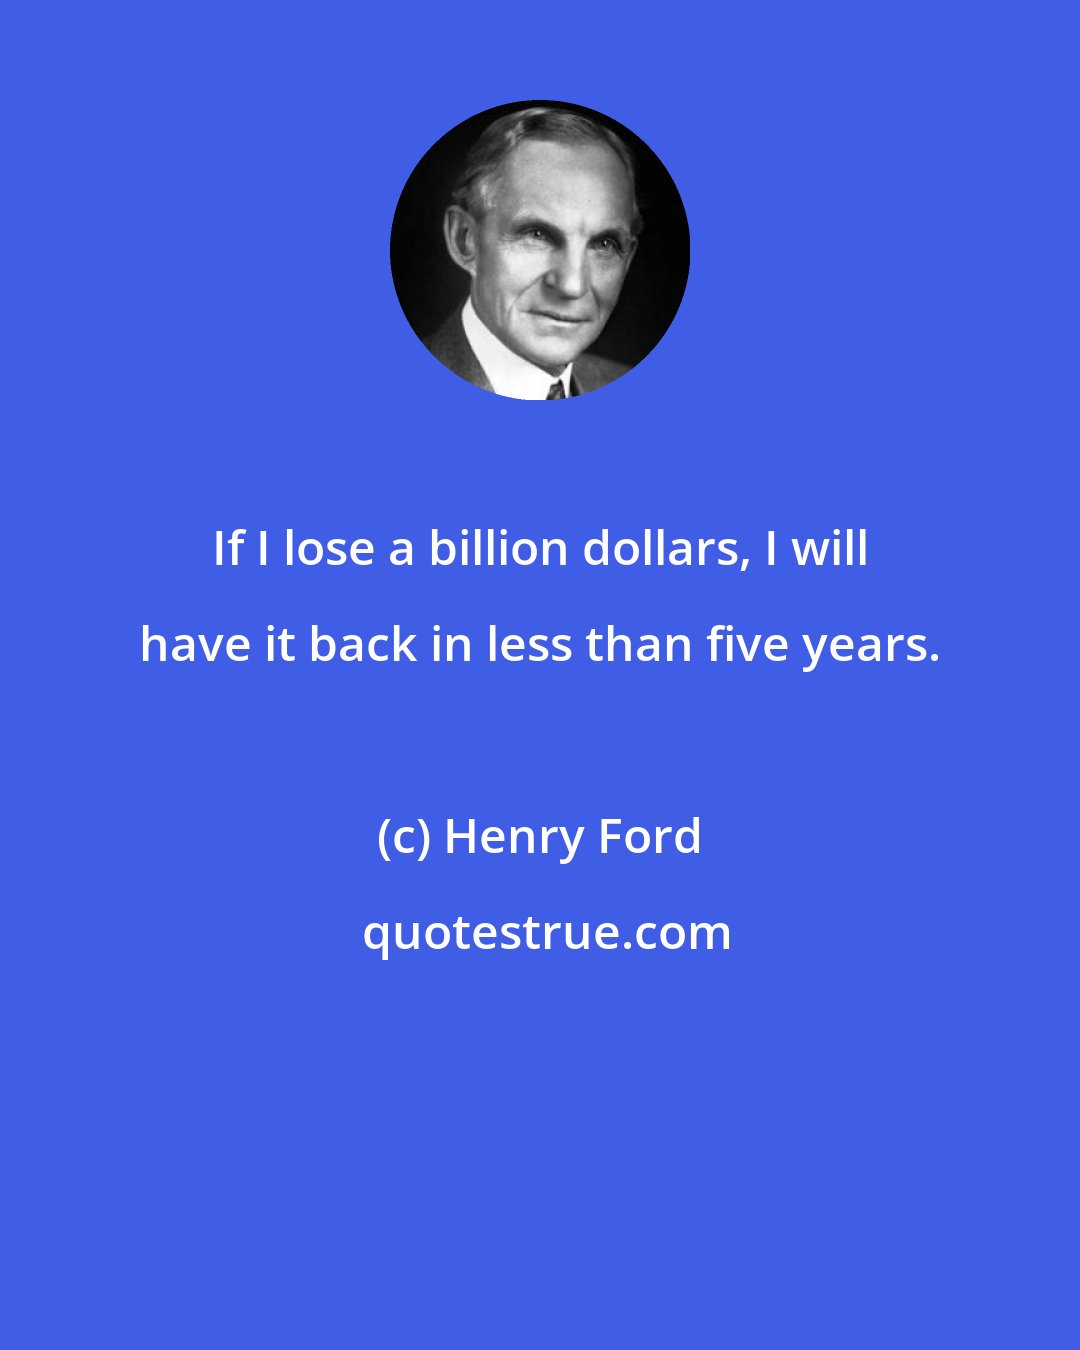 Henry Ford: If I lose a billion dollars, I will have it back in less than five years.